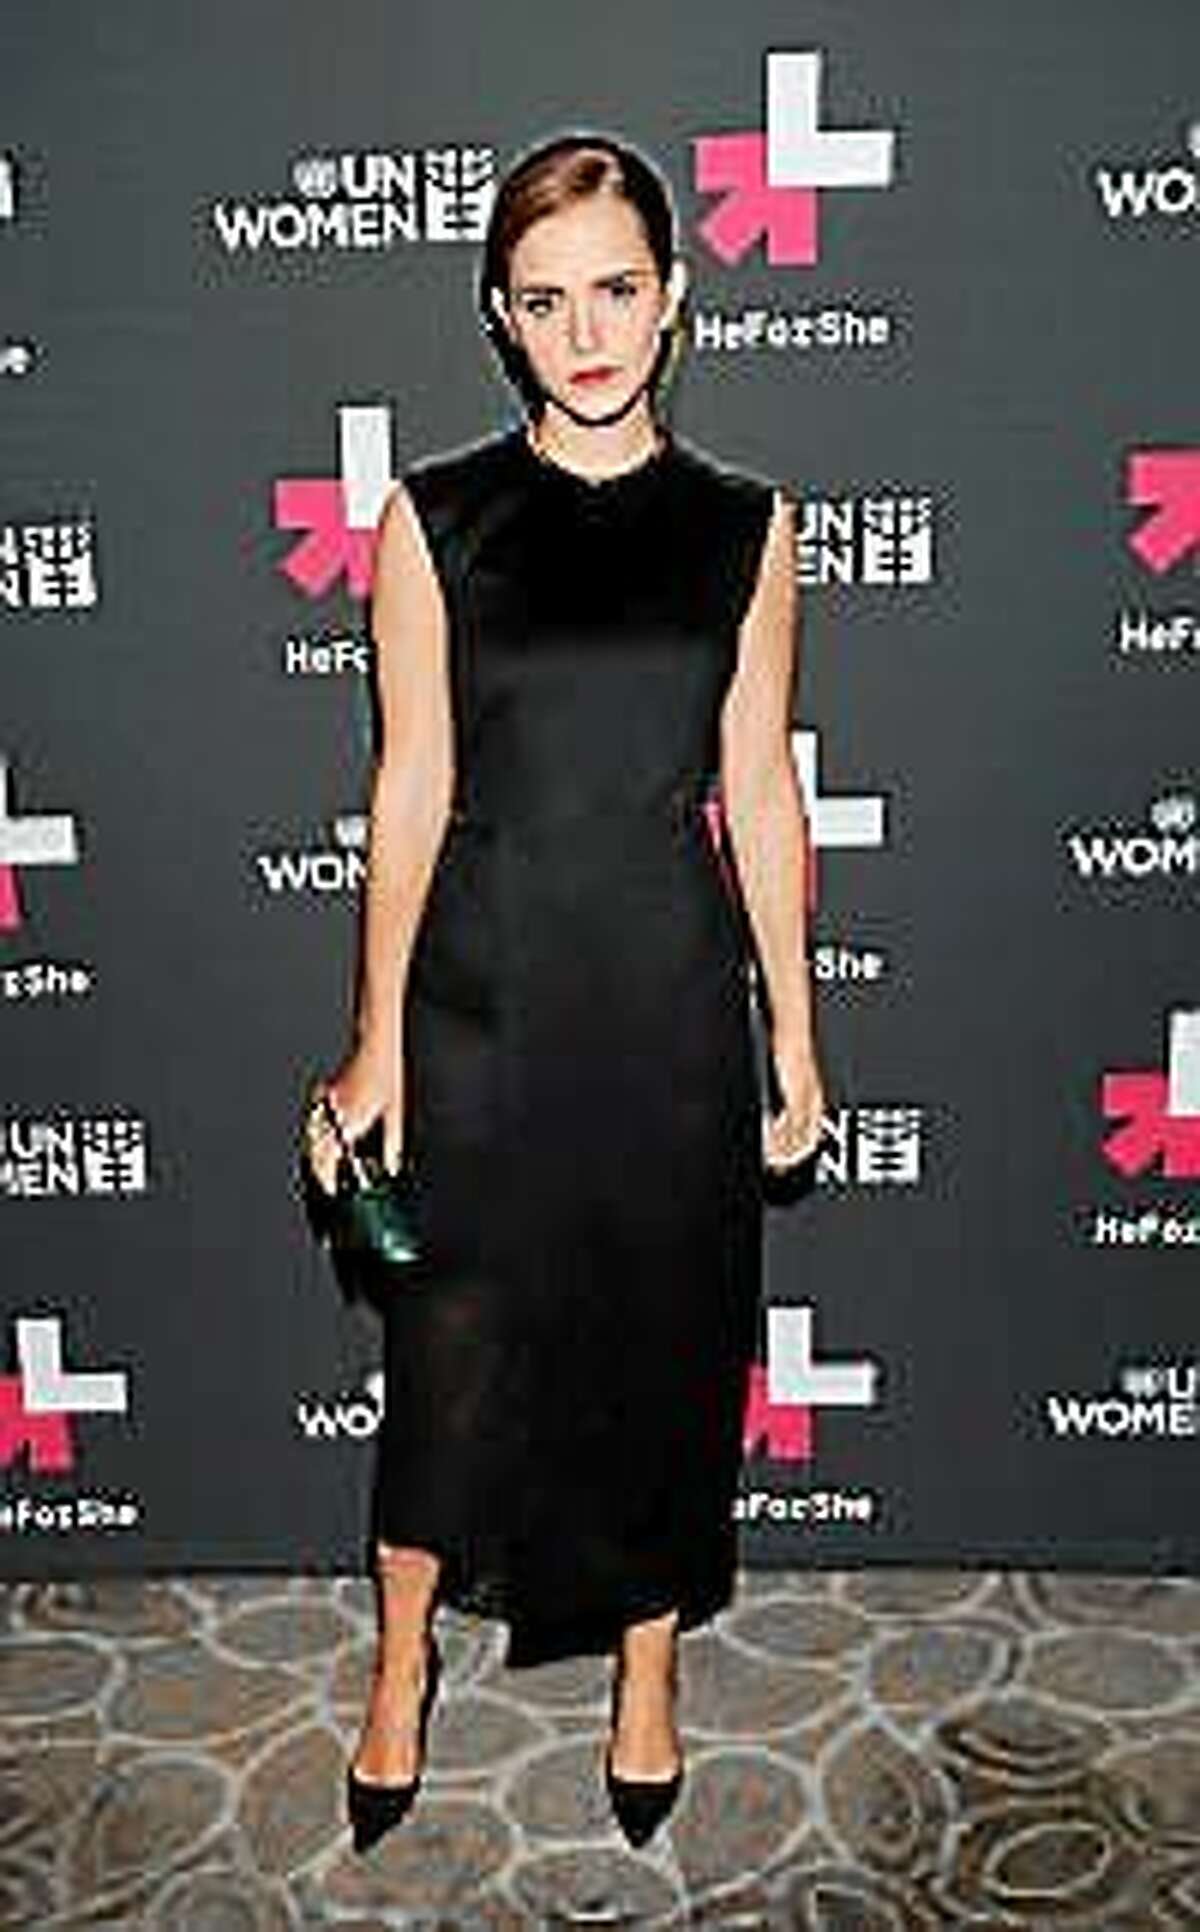 UN Women Goodwill Ambassador Emma Watson attends the HeForShe United Nations campaign launch party at the The Peninsula Hotel on Saturday, Sept. 20, 2014, in New York.